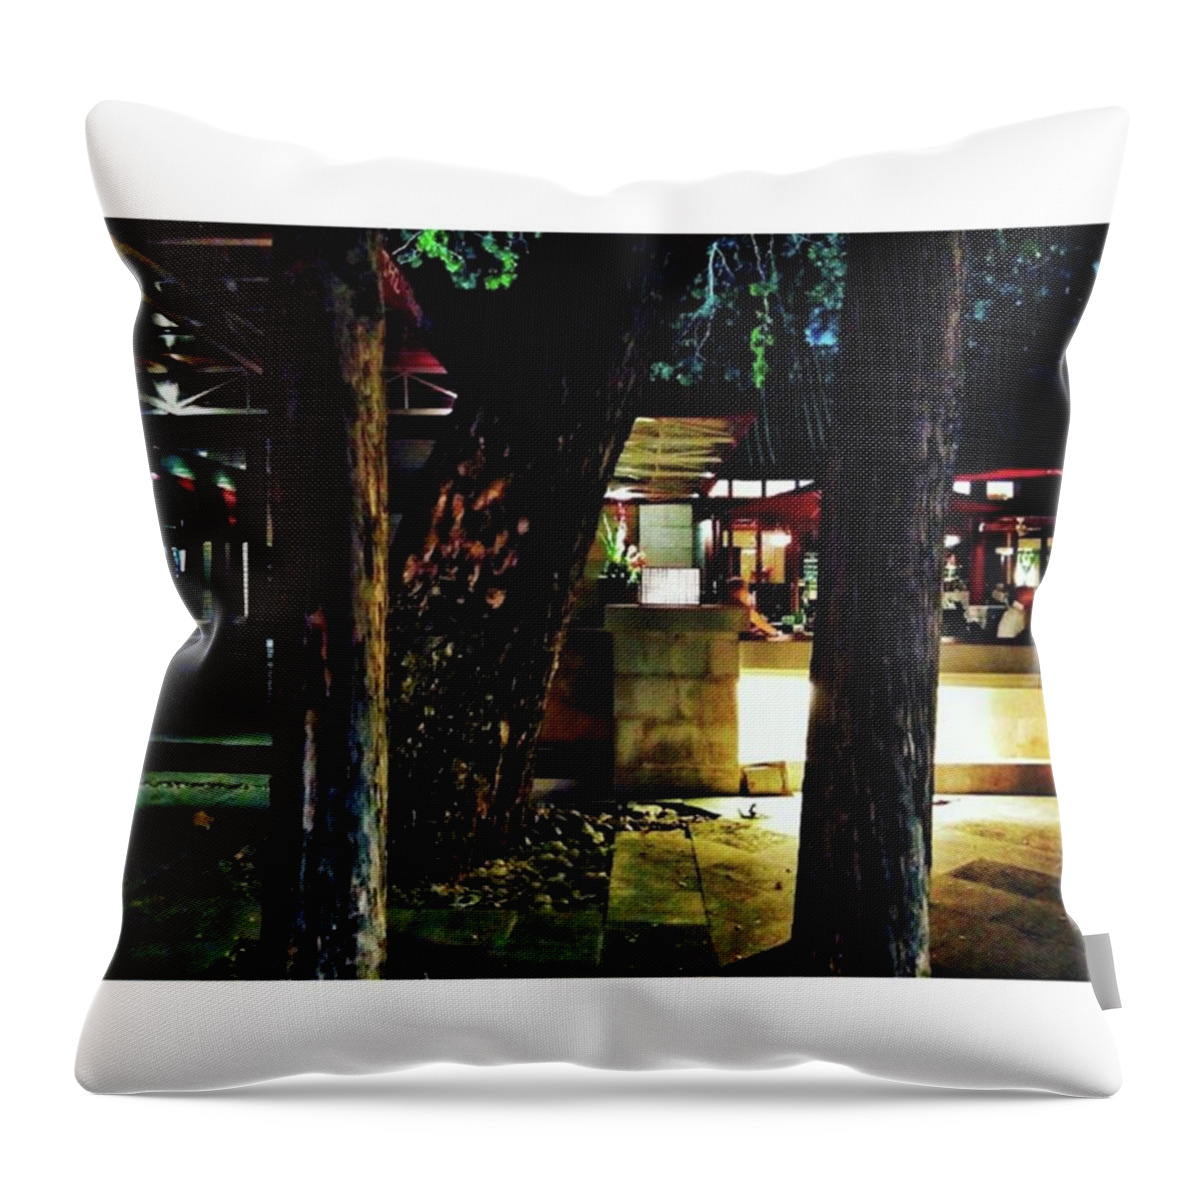 Travelandrestaurant Throw Pillow featuring the photograph #holidayseason: Let Me Light Up Your by Loly Lucious